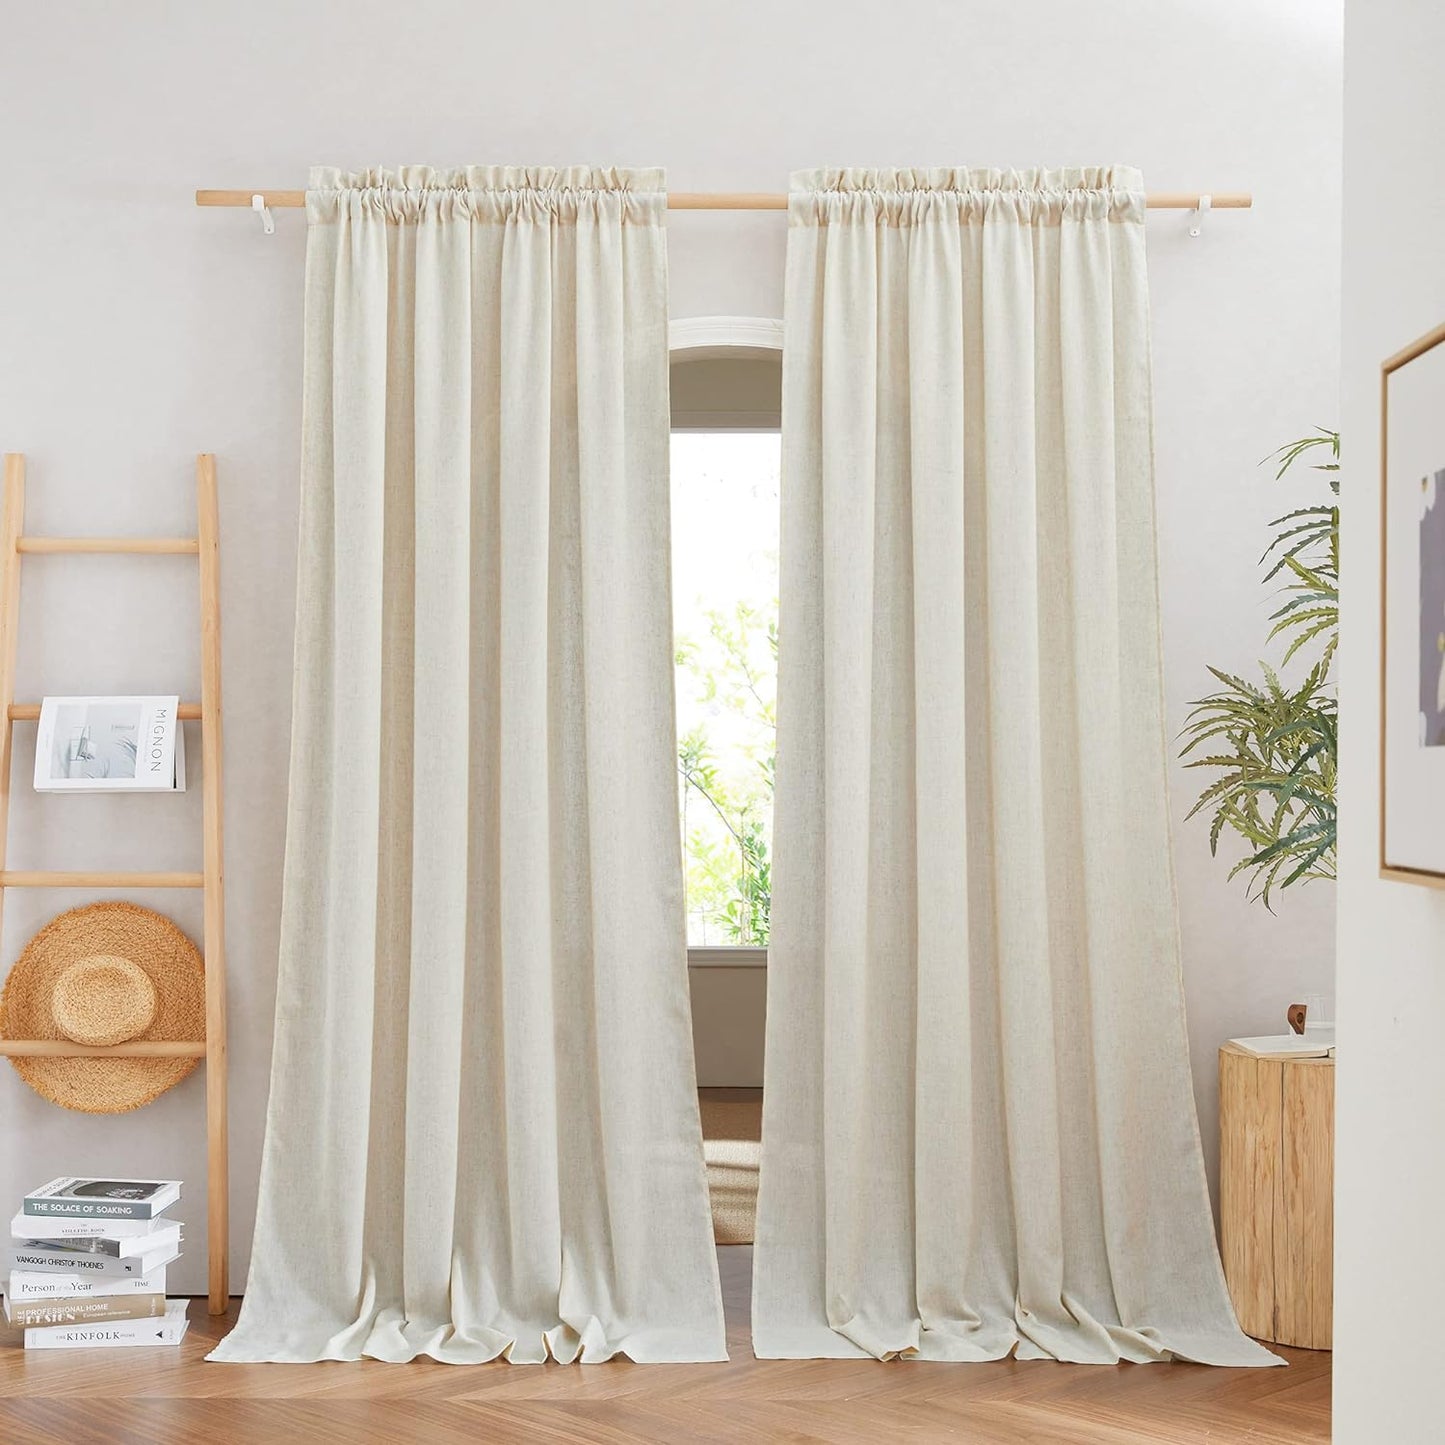 NICETOWN Natural Linen Curtains & Drapes for Windows 84 Inch Long, Rod Pocket Thick Flax Semi Sheer Privacy Assured with Light Filtering for Bedroom/Living Room, W55 X L84, 2 Pieces  NICETOWN Natural W55 X L95 